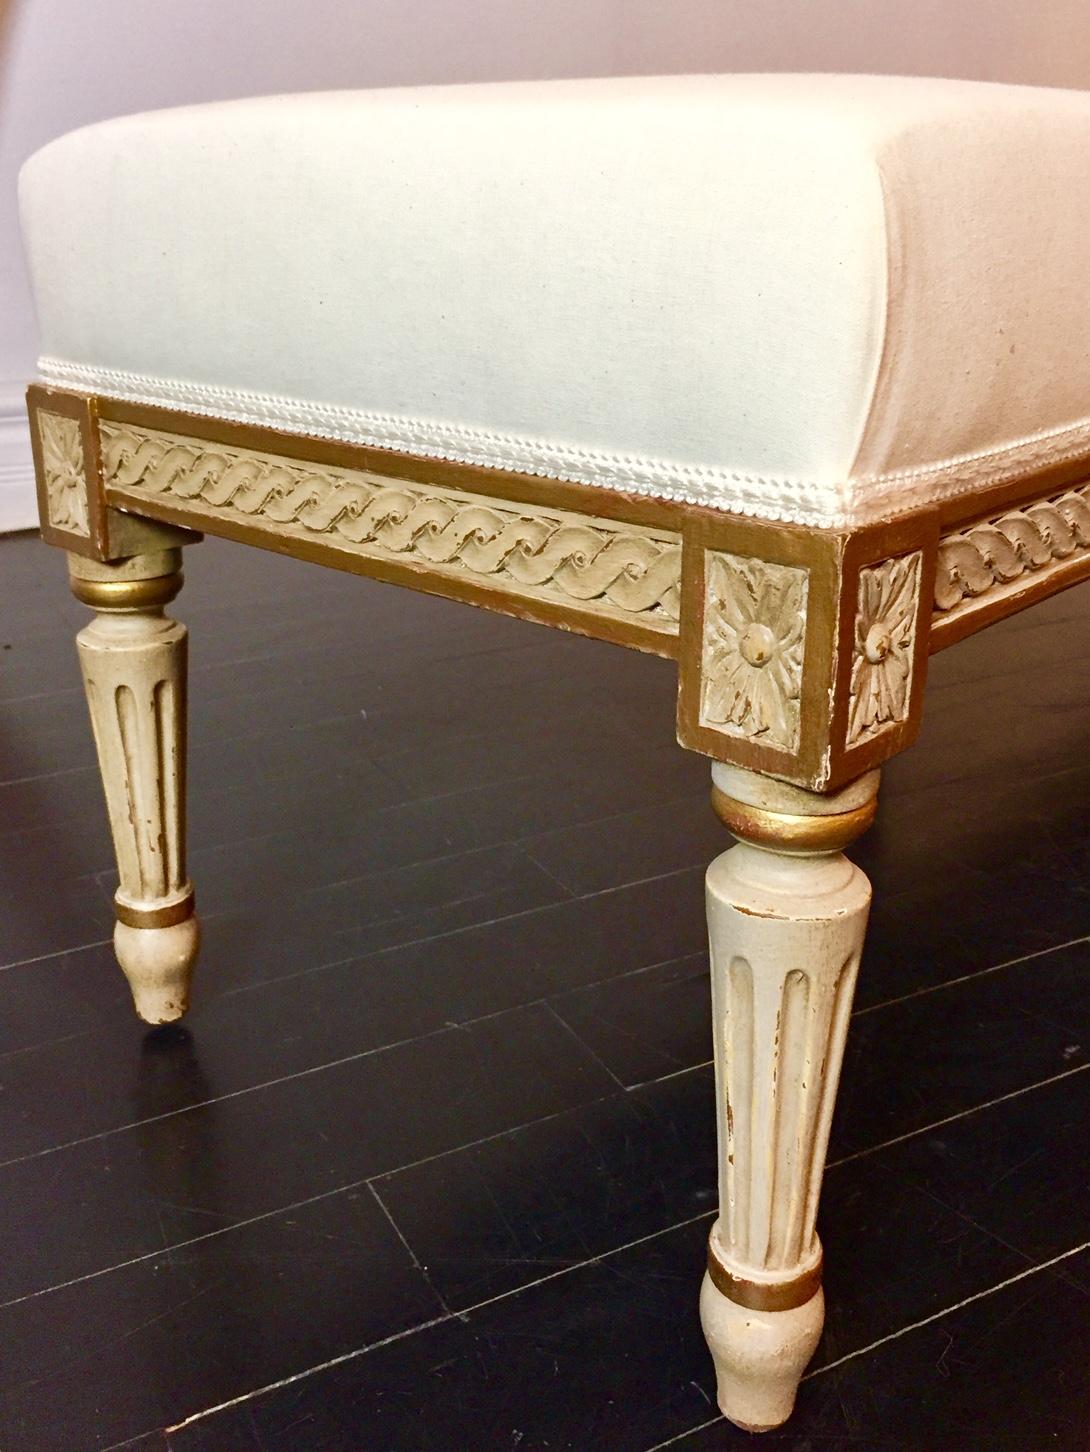 French Louis XVI style banquette
This beautiful and versatile banquette by Massant is the perfect decorative accessory at the foot of a bed, at a table, in a hallway, an entrance, and myriad uses. 
We have various models available in varying wood